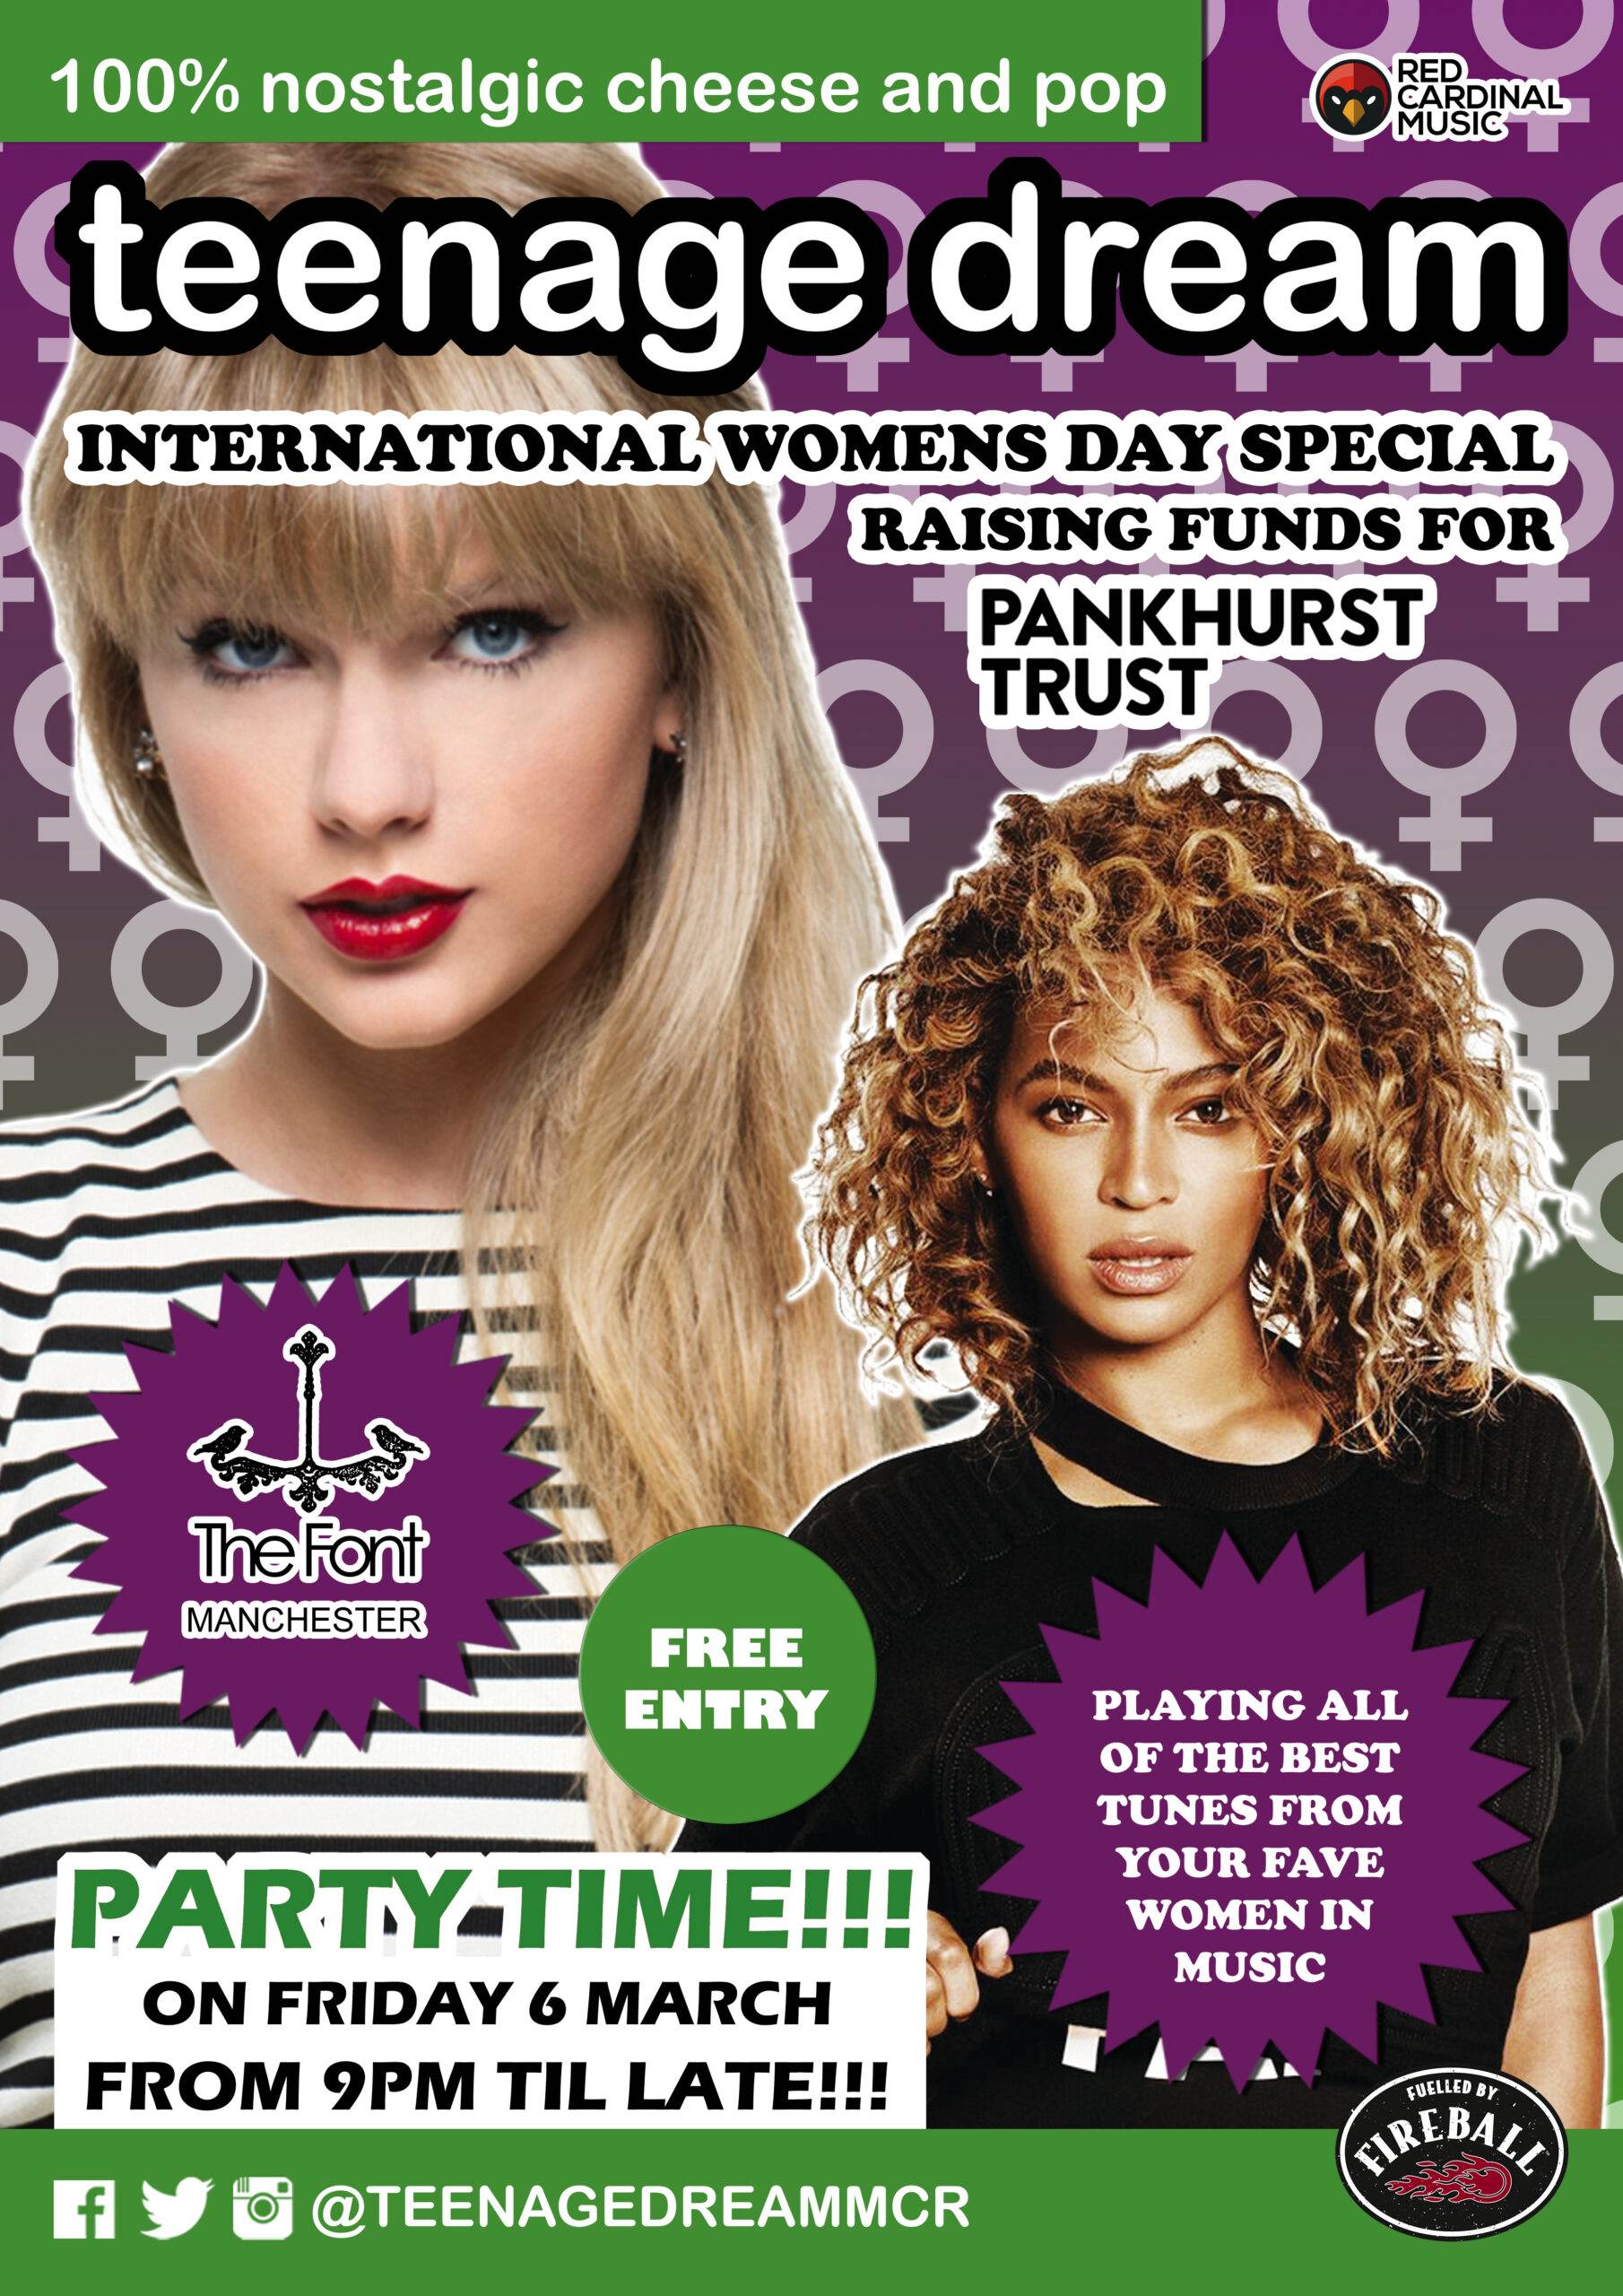 Teenage Dream - March 2020 - International Womens Day Special - Poster - Pankhurst Trust